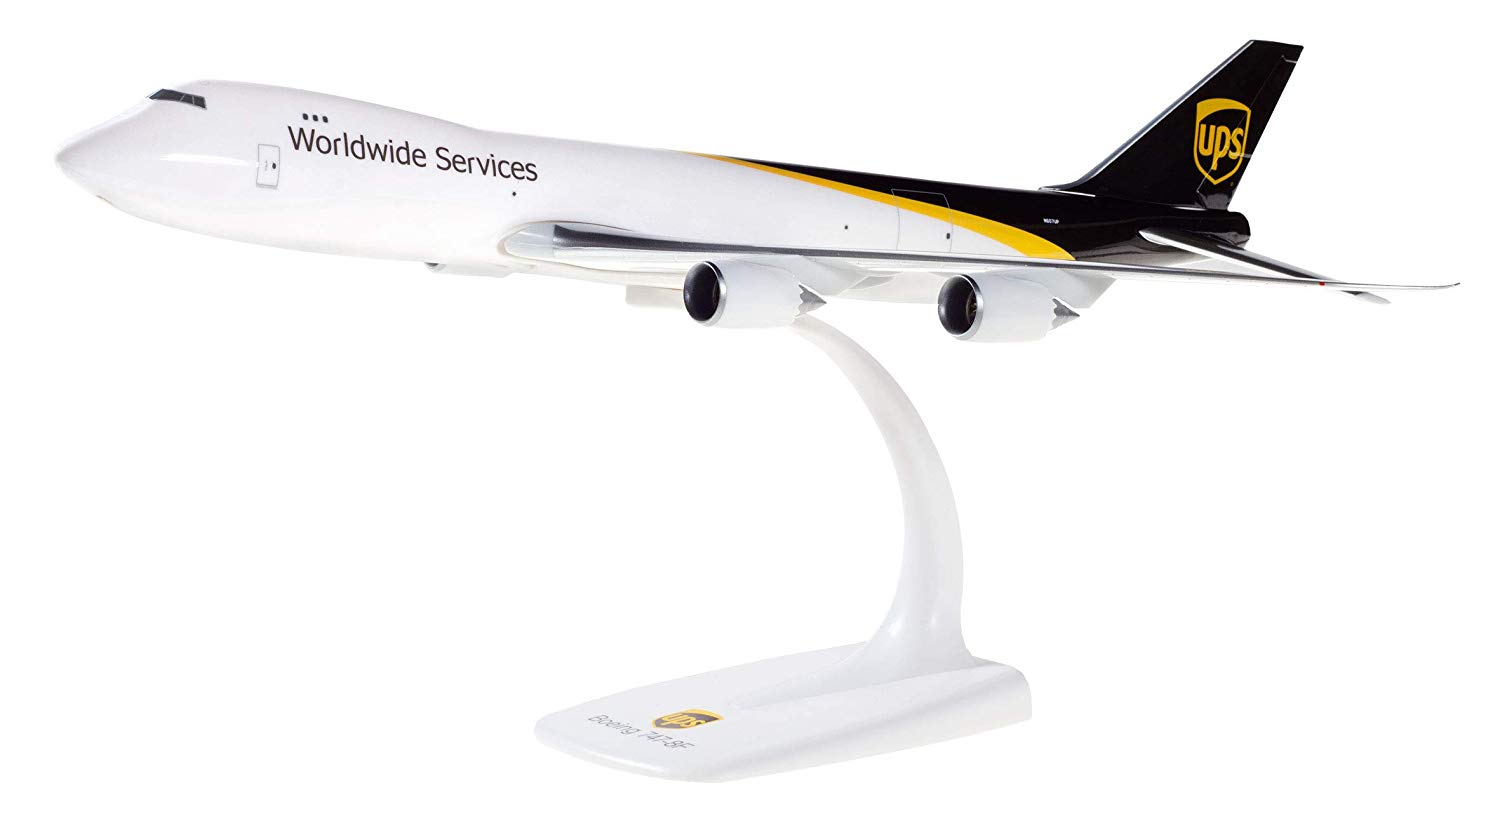 Herpa Miniaturmodelle GmbH Herpa 612241 Ups Boeing 747-8F Wings/Aircraft To Collect Multi-Colored